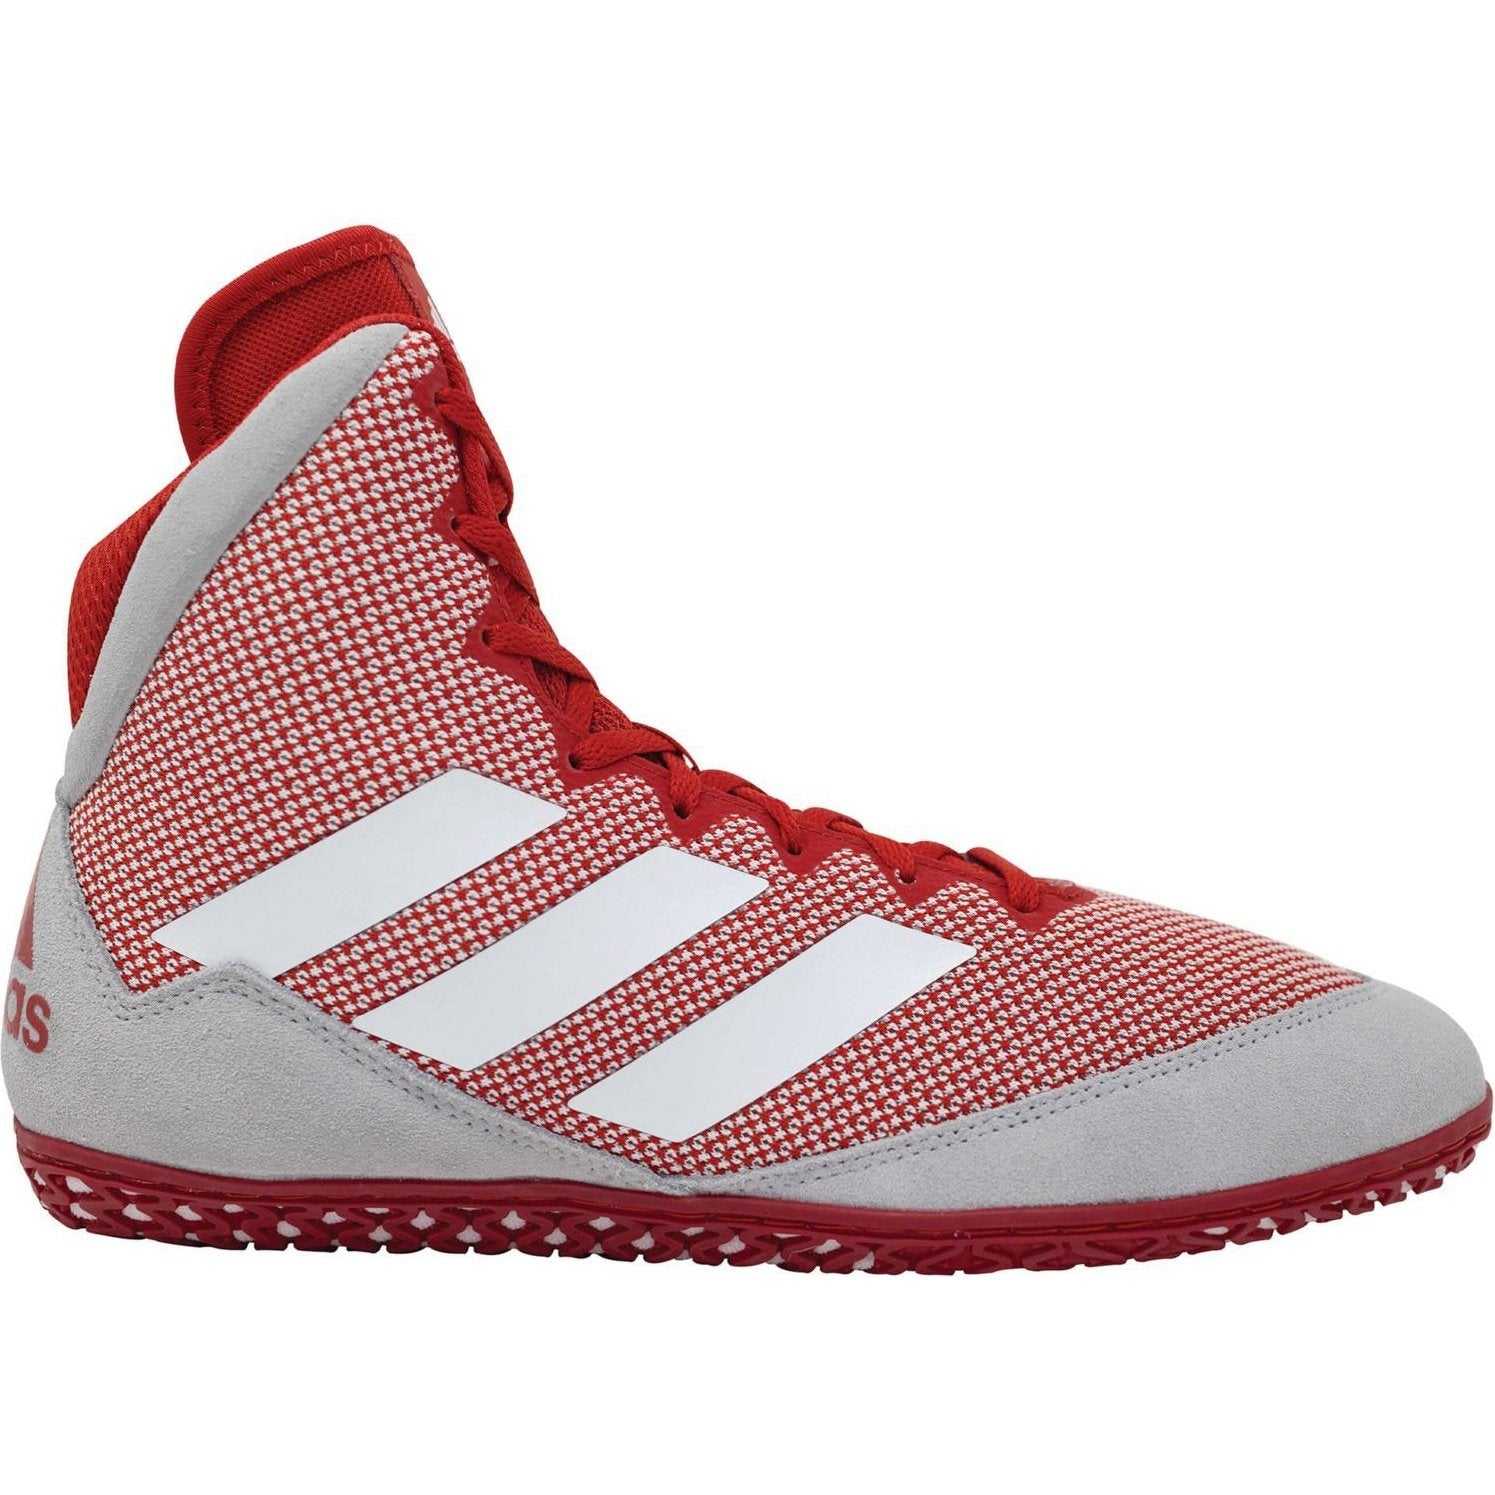 Adidas 232 Mat Wizard 5 Wrestling Shoes - Red Gray White